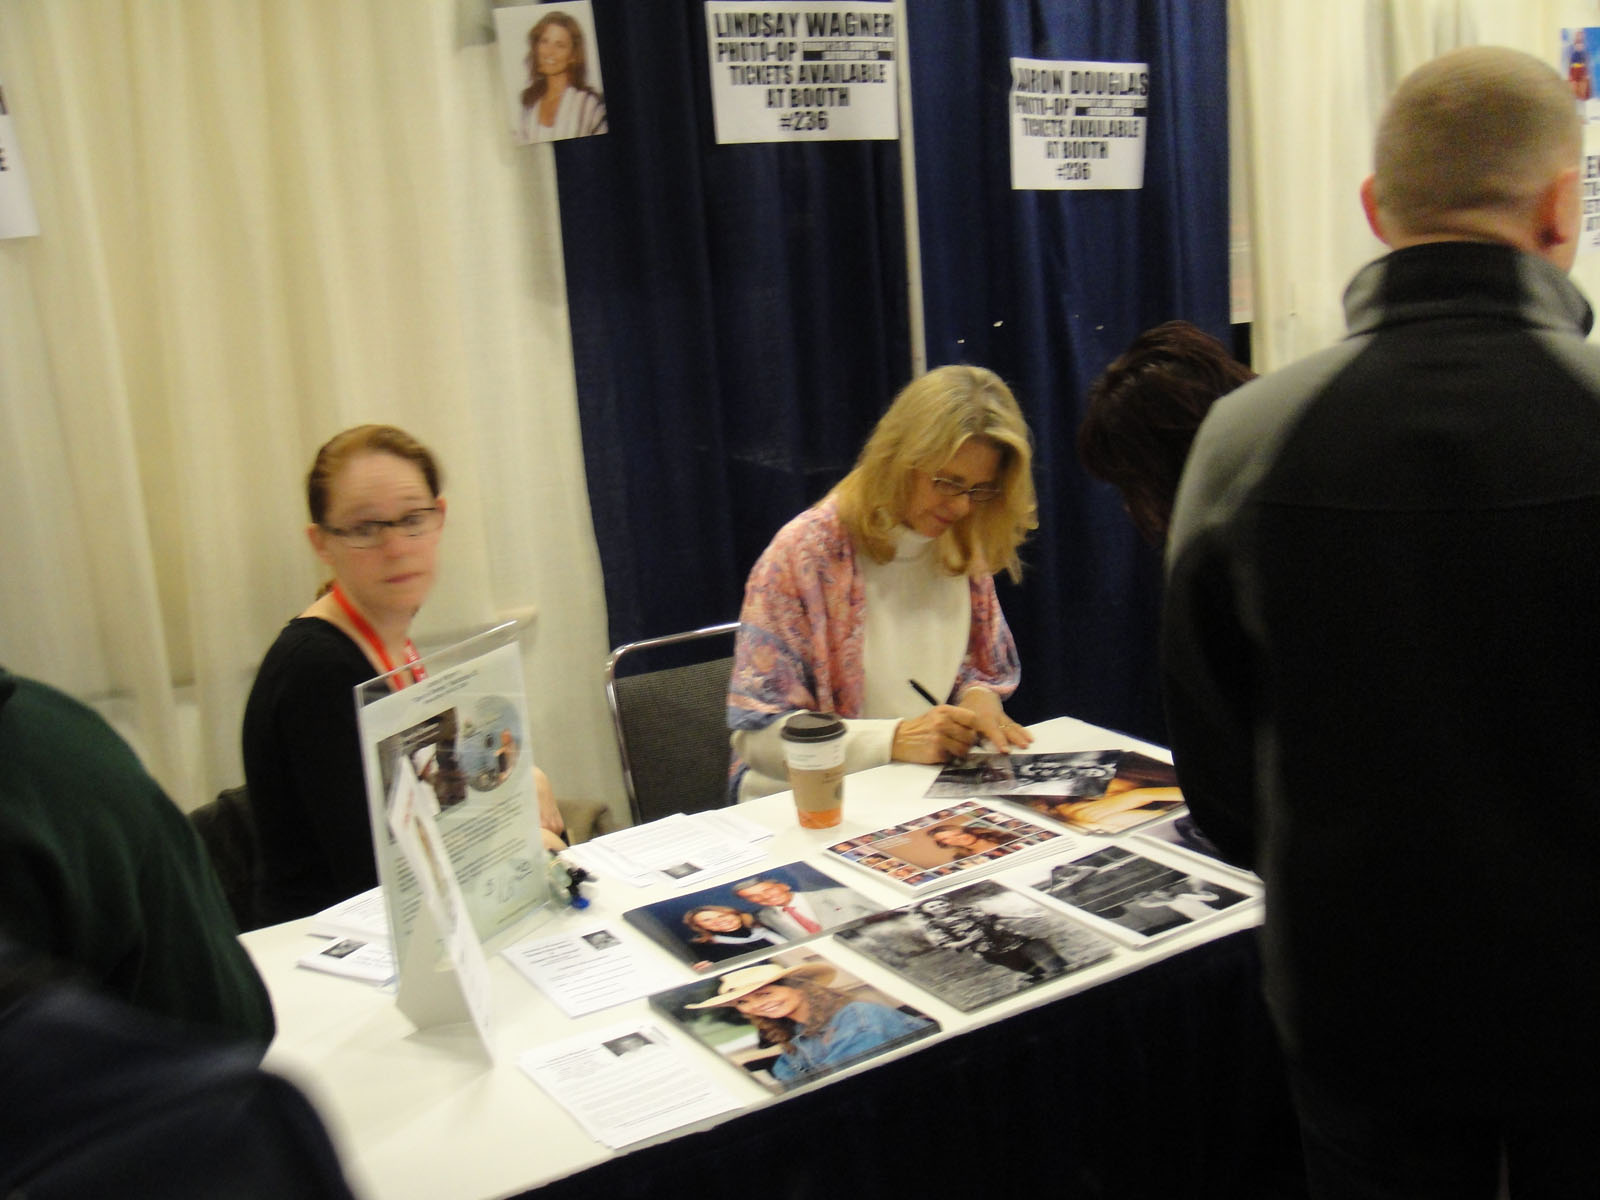 a woman at a table signing papers and drinking a cup of coffee